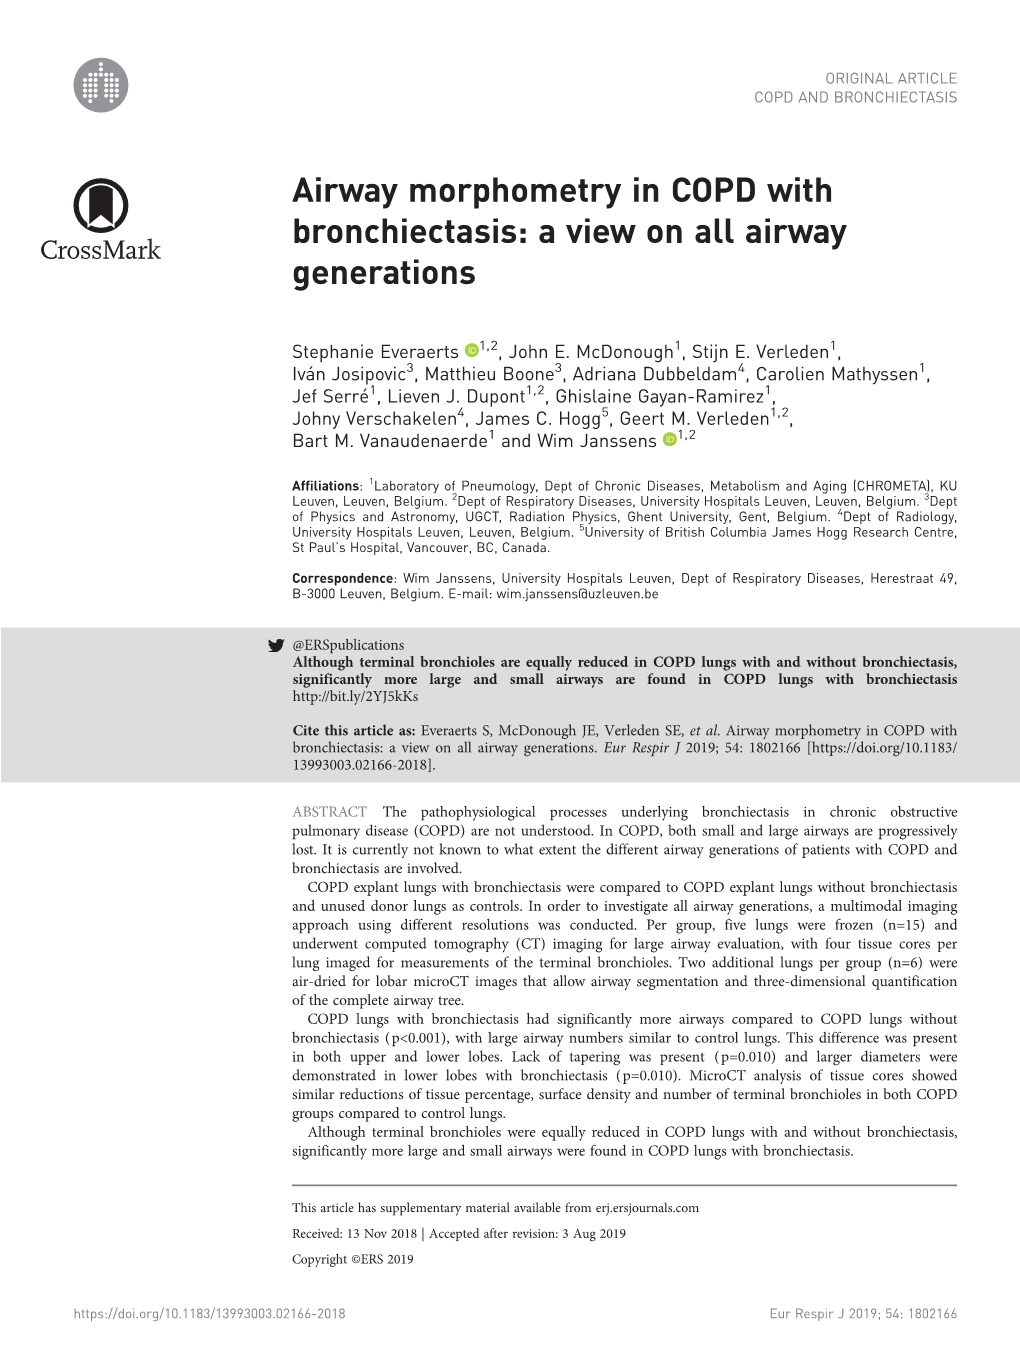 Airway Morphometry in COPD with Bronchiectasis: a View on All Airway Generations